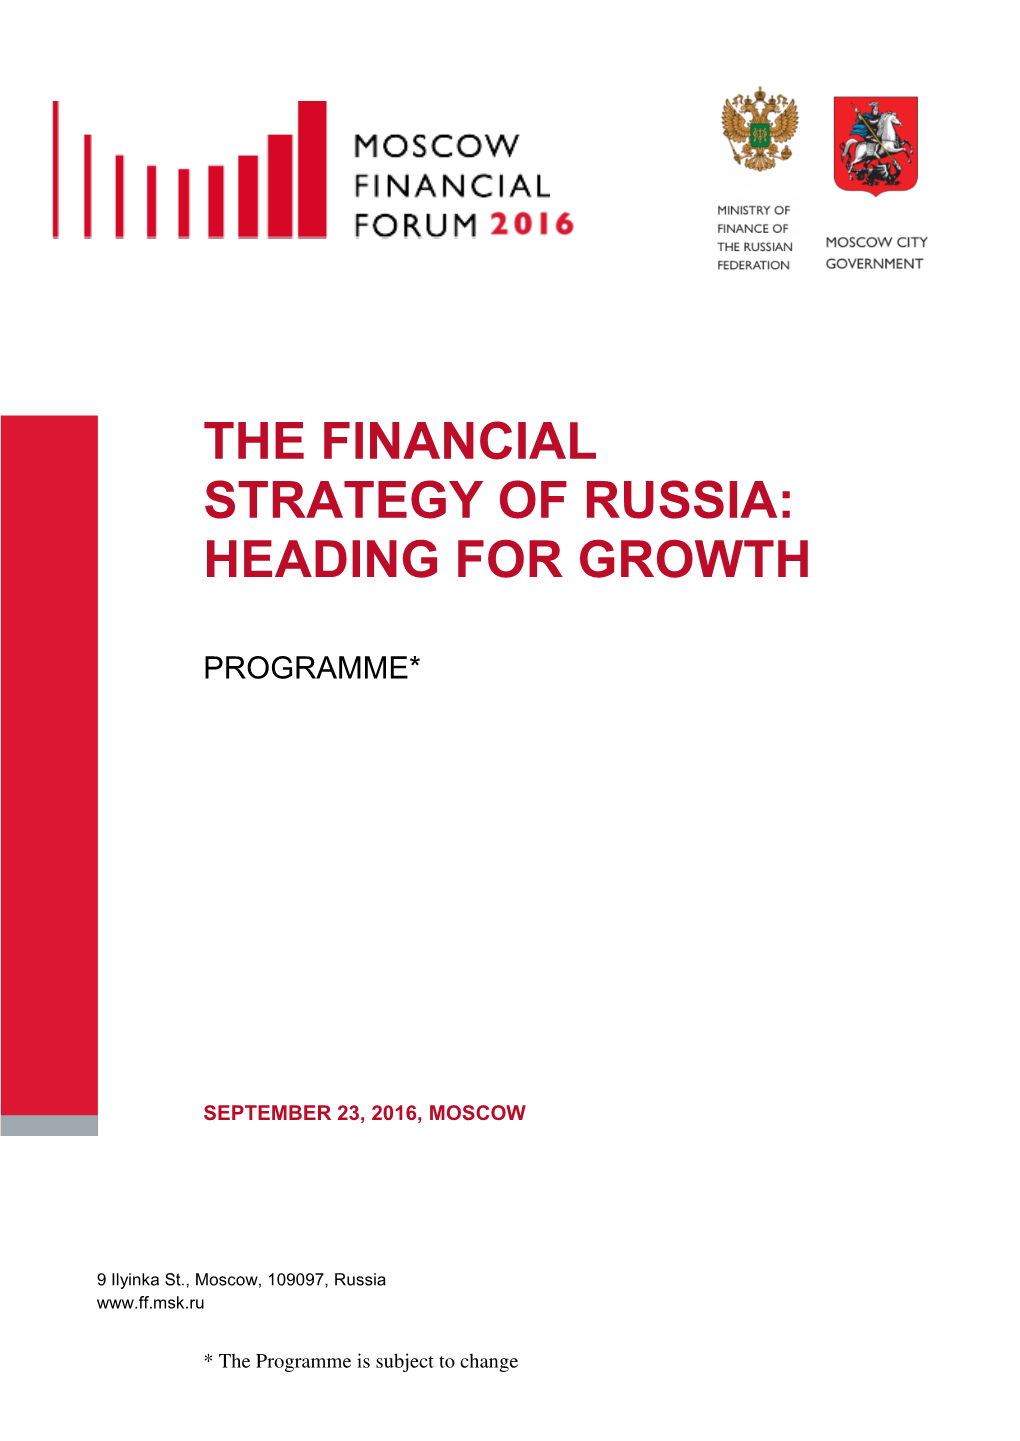 The Financial Strategy of Russia: Heading for Growth